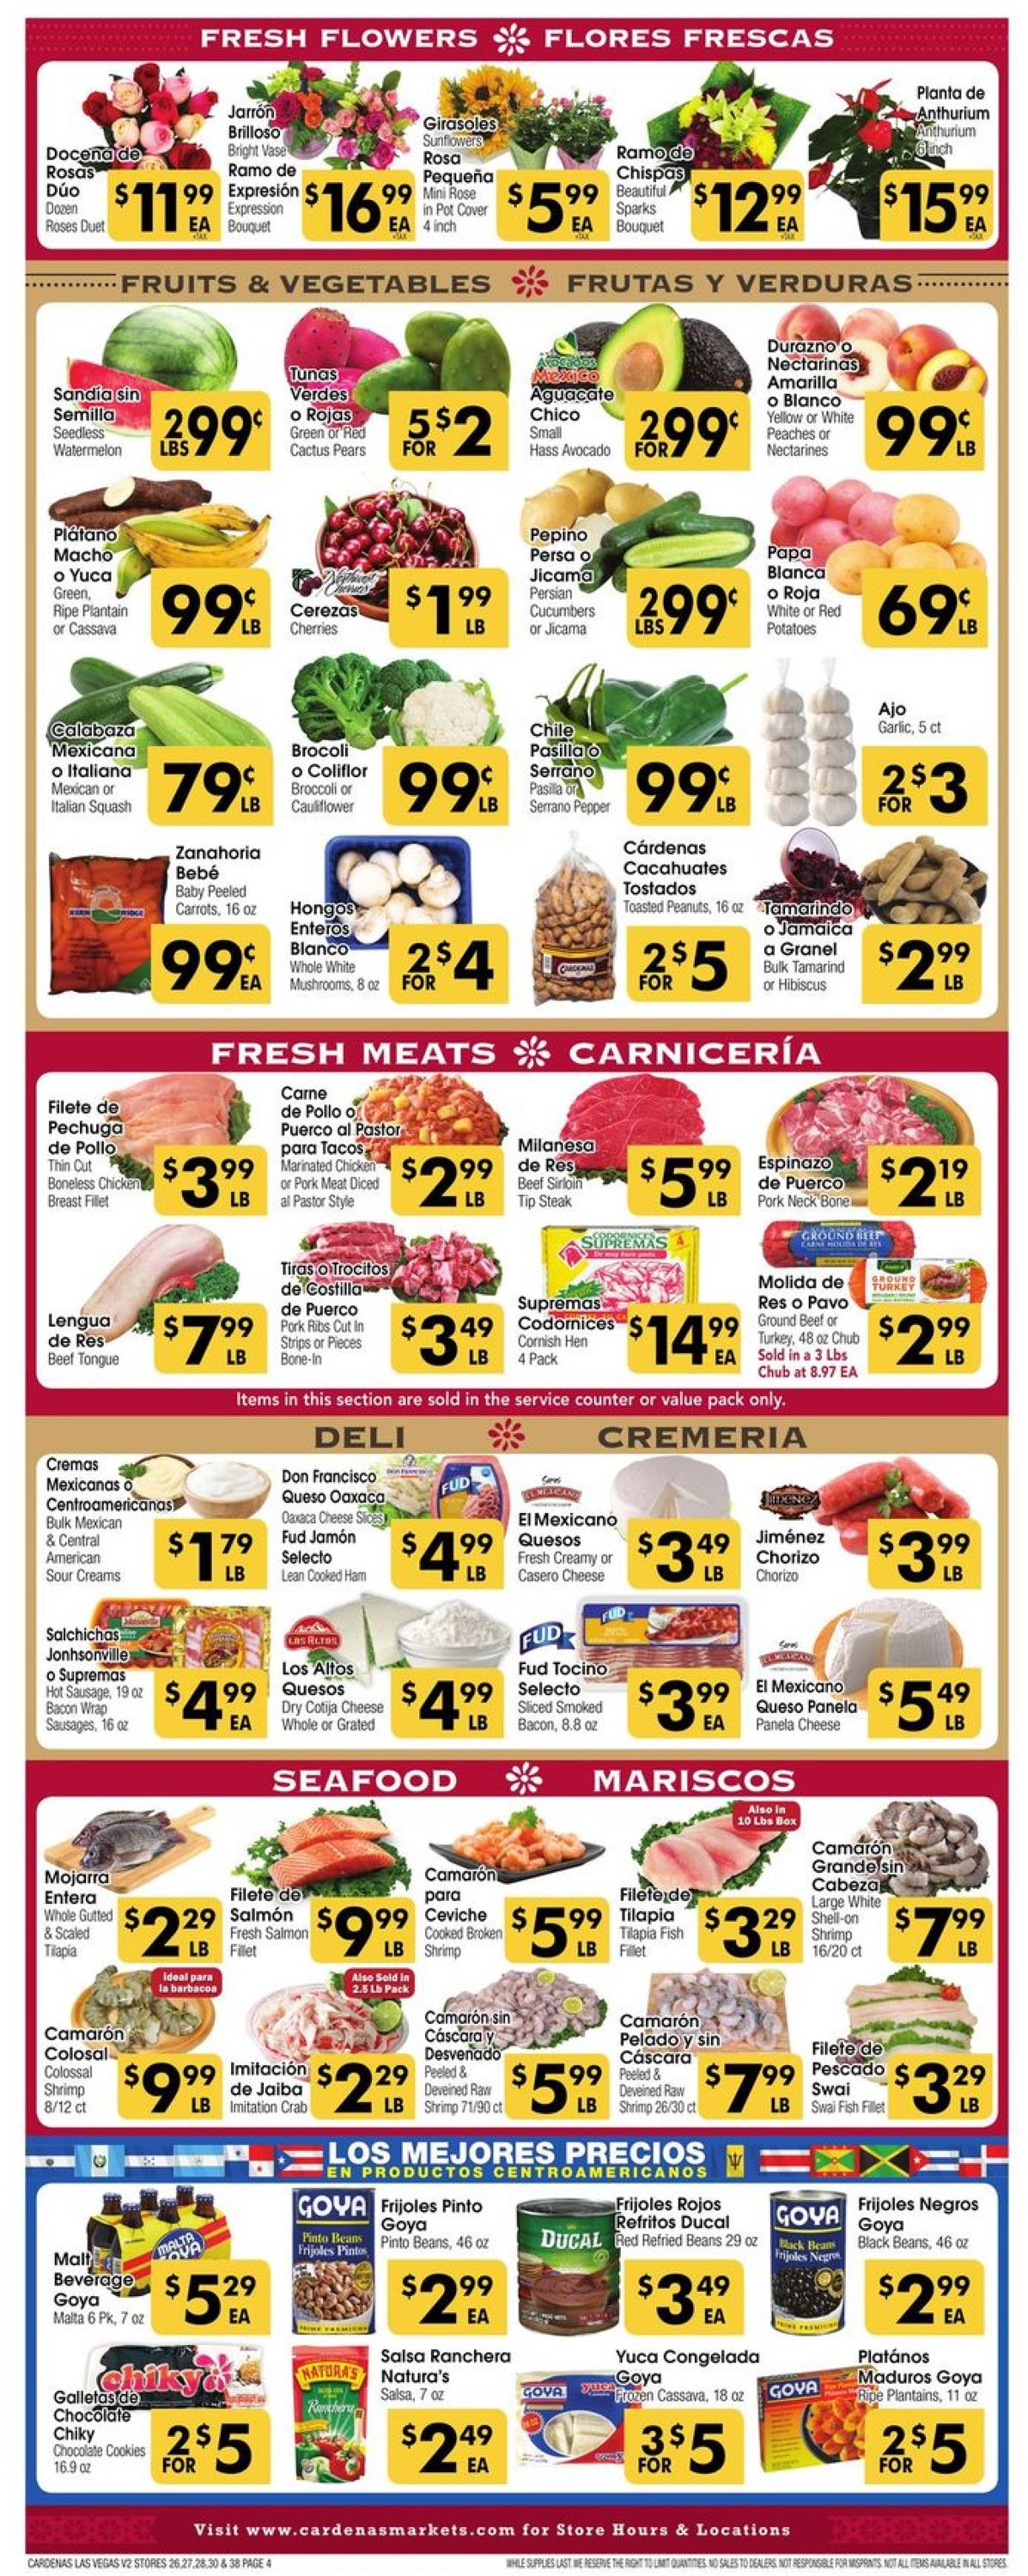 Cardenas Ad from 07/28/2021